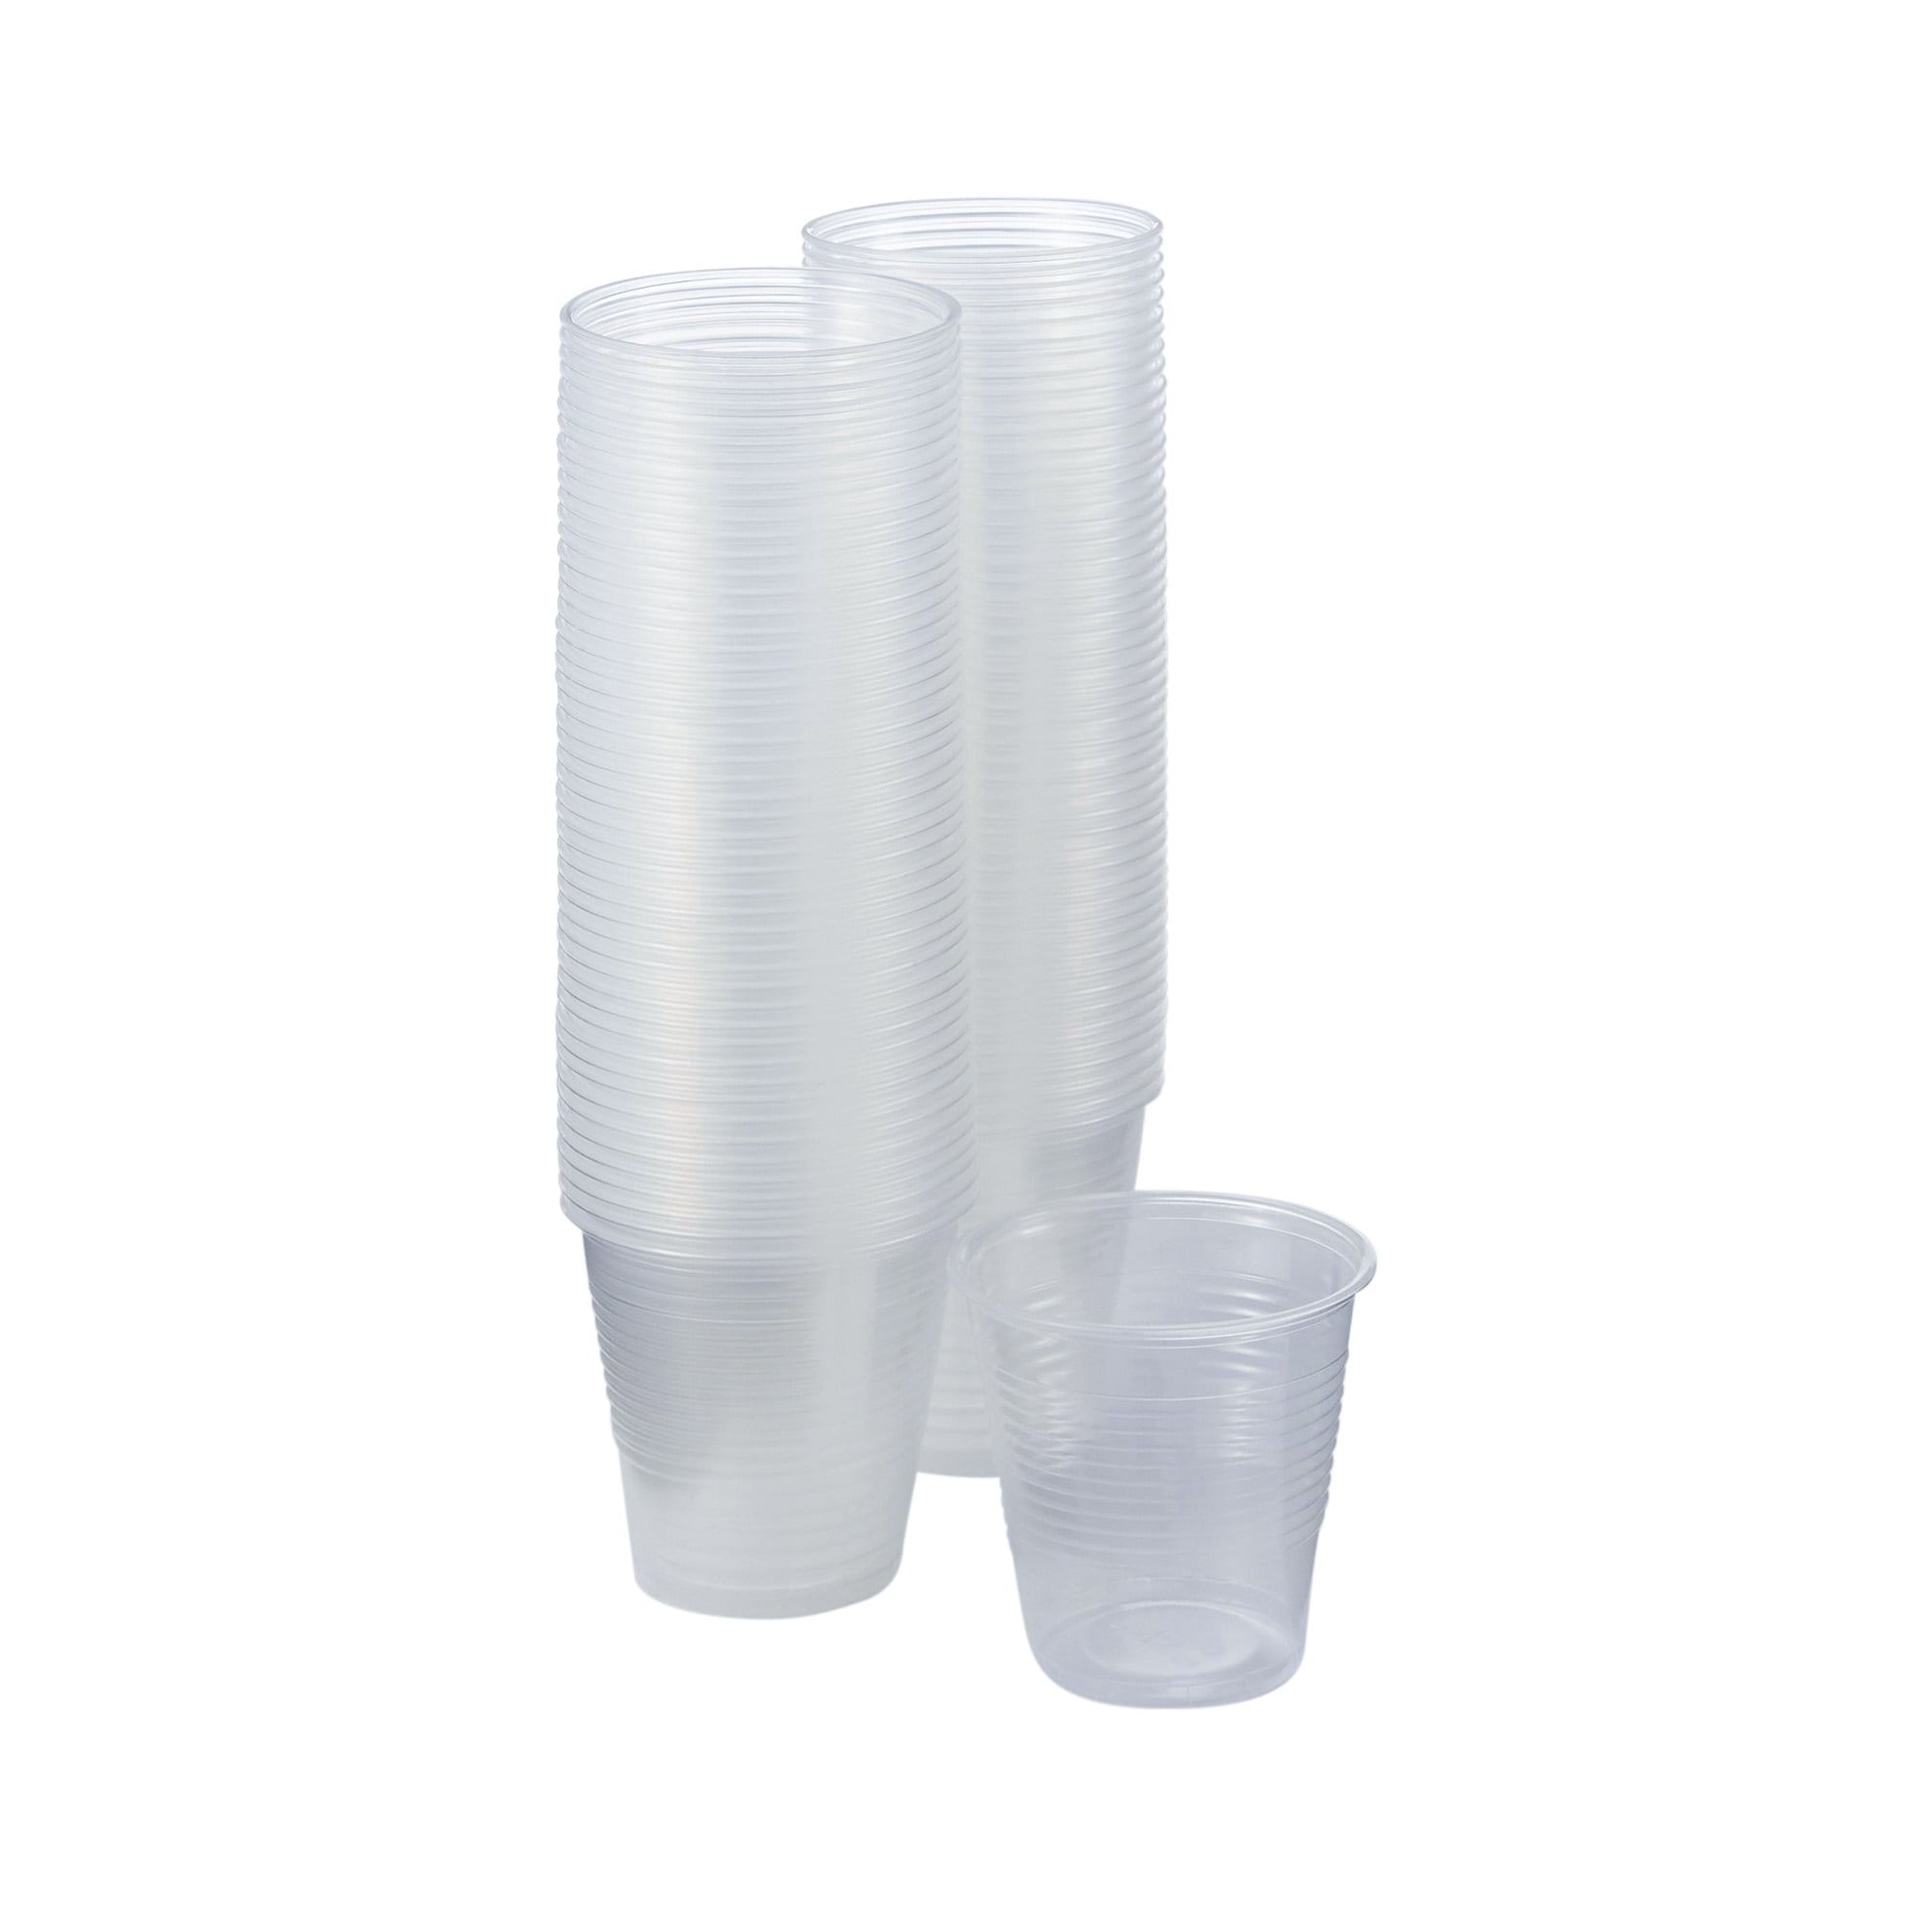 Great Value Everyday Disposable Plastic Cups, Clear, 2 oz, 50 count 